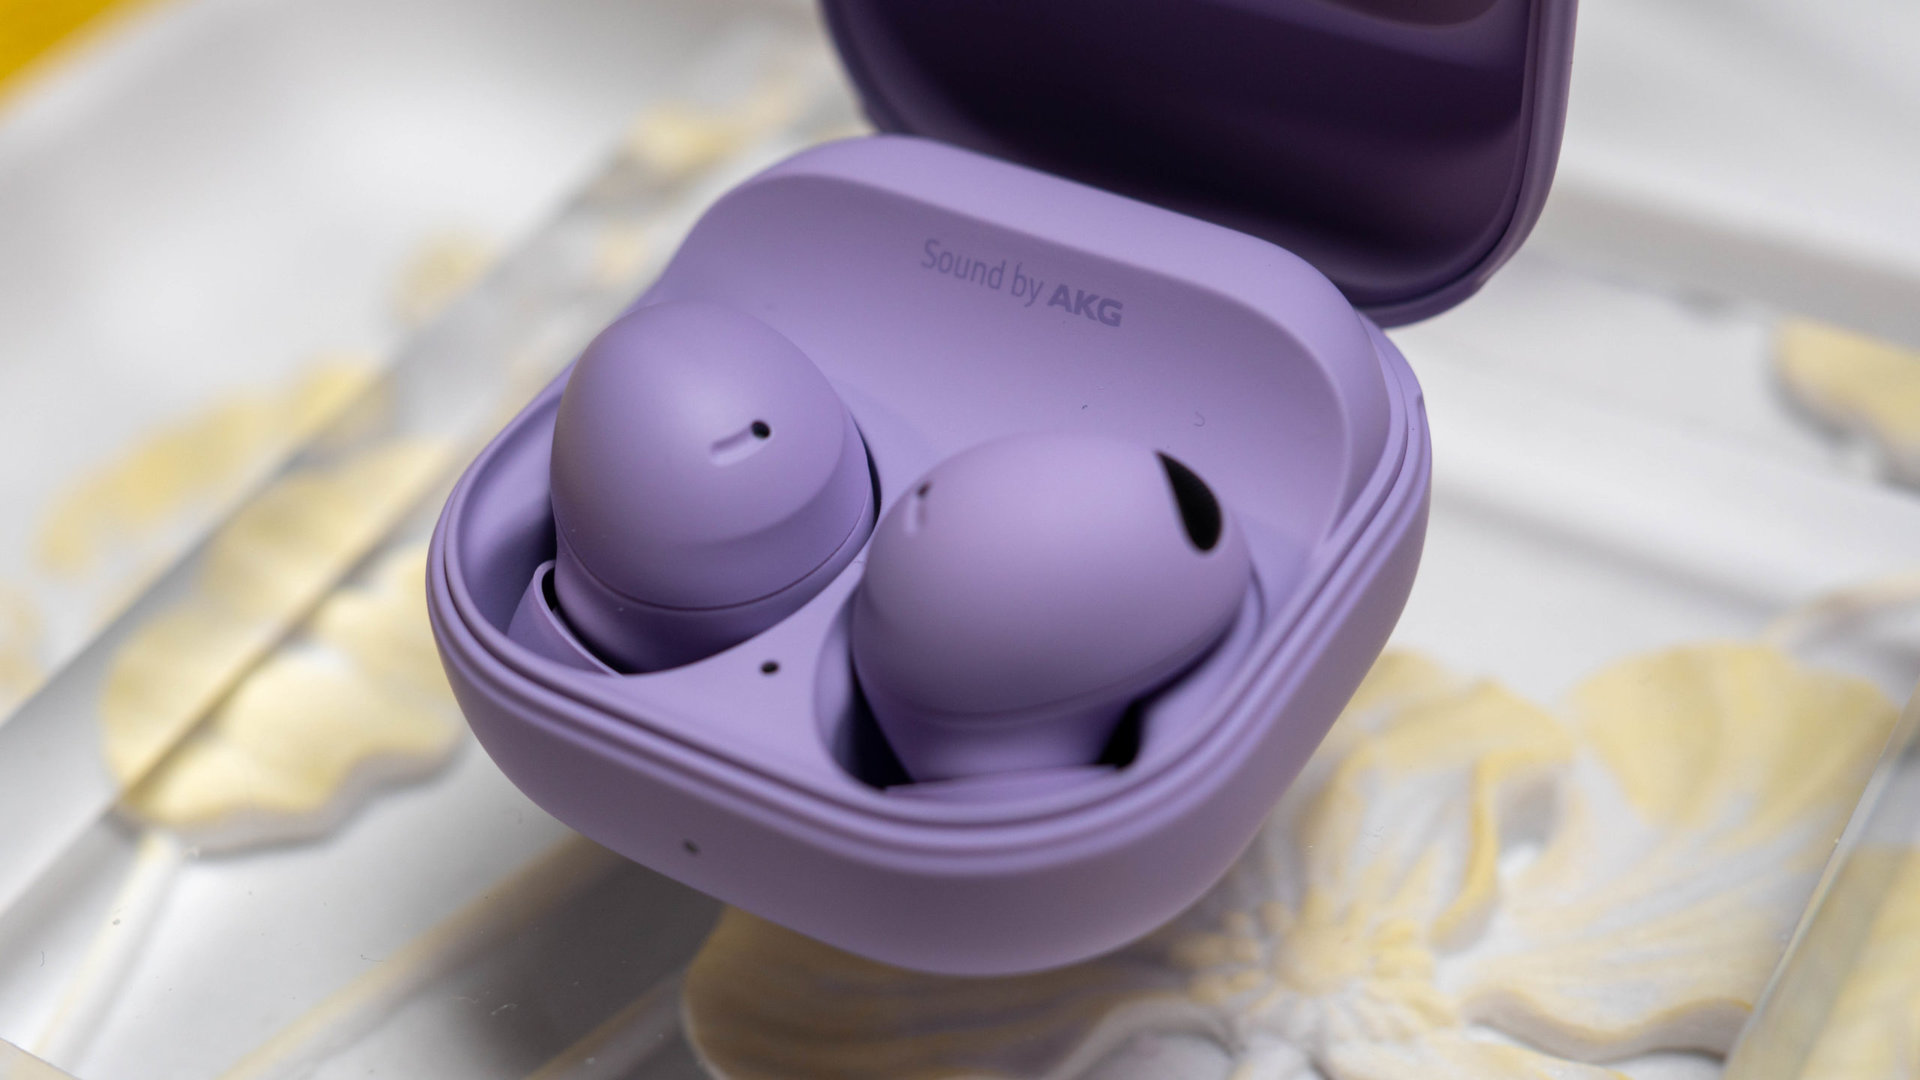 The Samsung Galaxy Buds 2 Pro in Bora Purple color in their charging case seen from the right side.